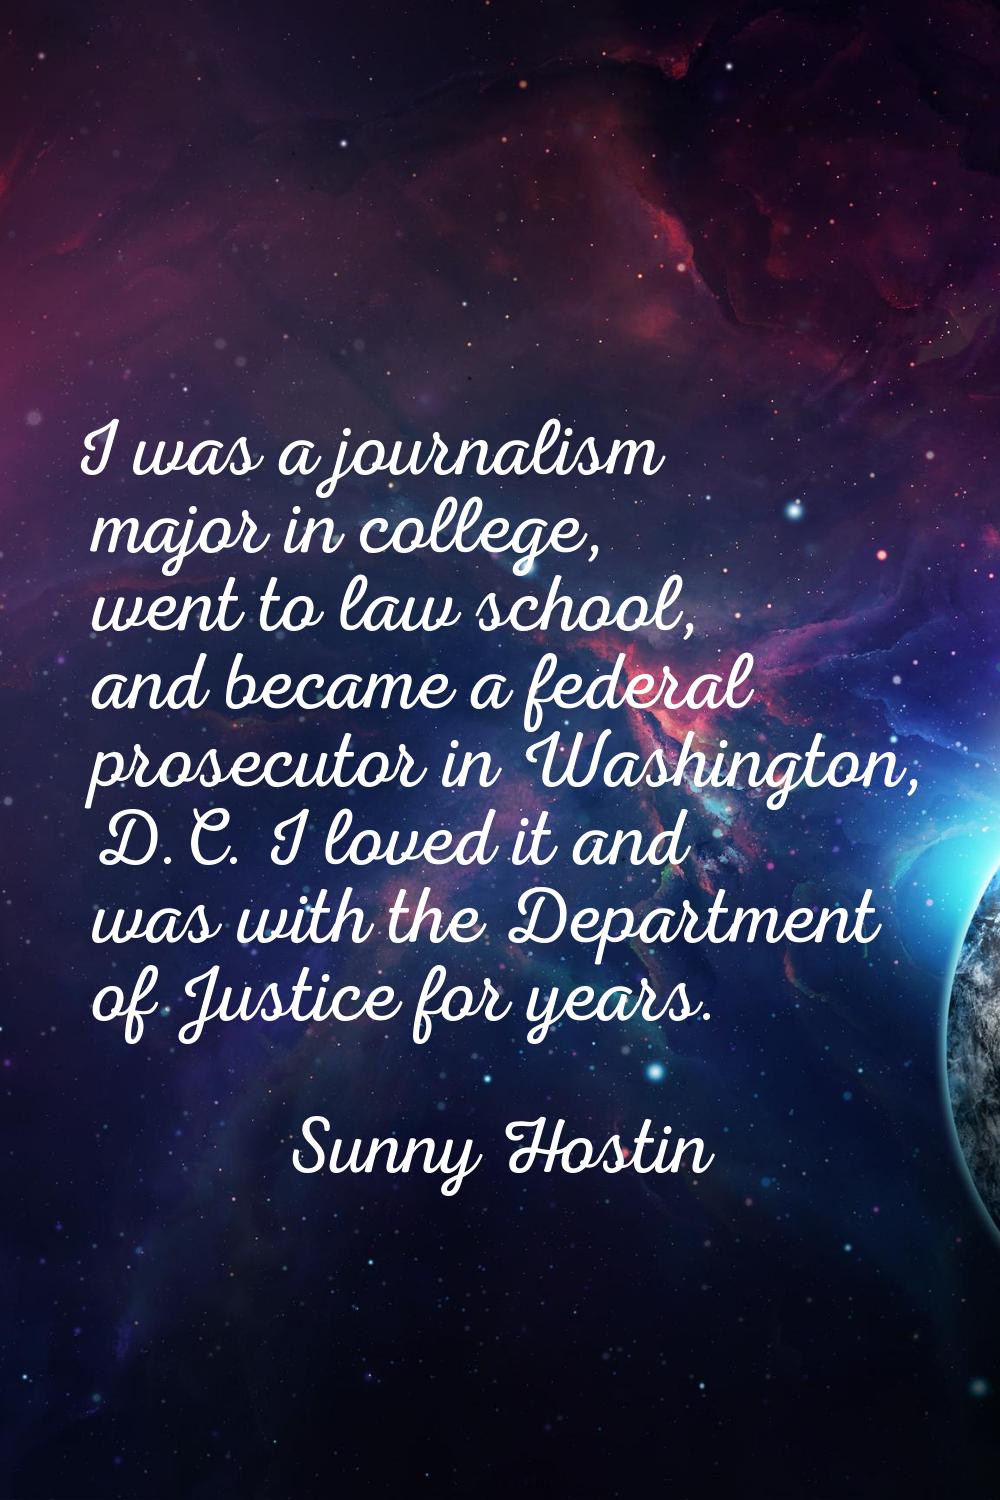 I was a journalism major in college, went to law school, and became a federal prosecutor in Washing